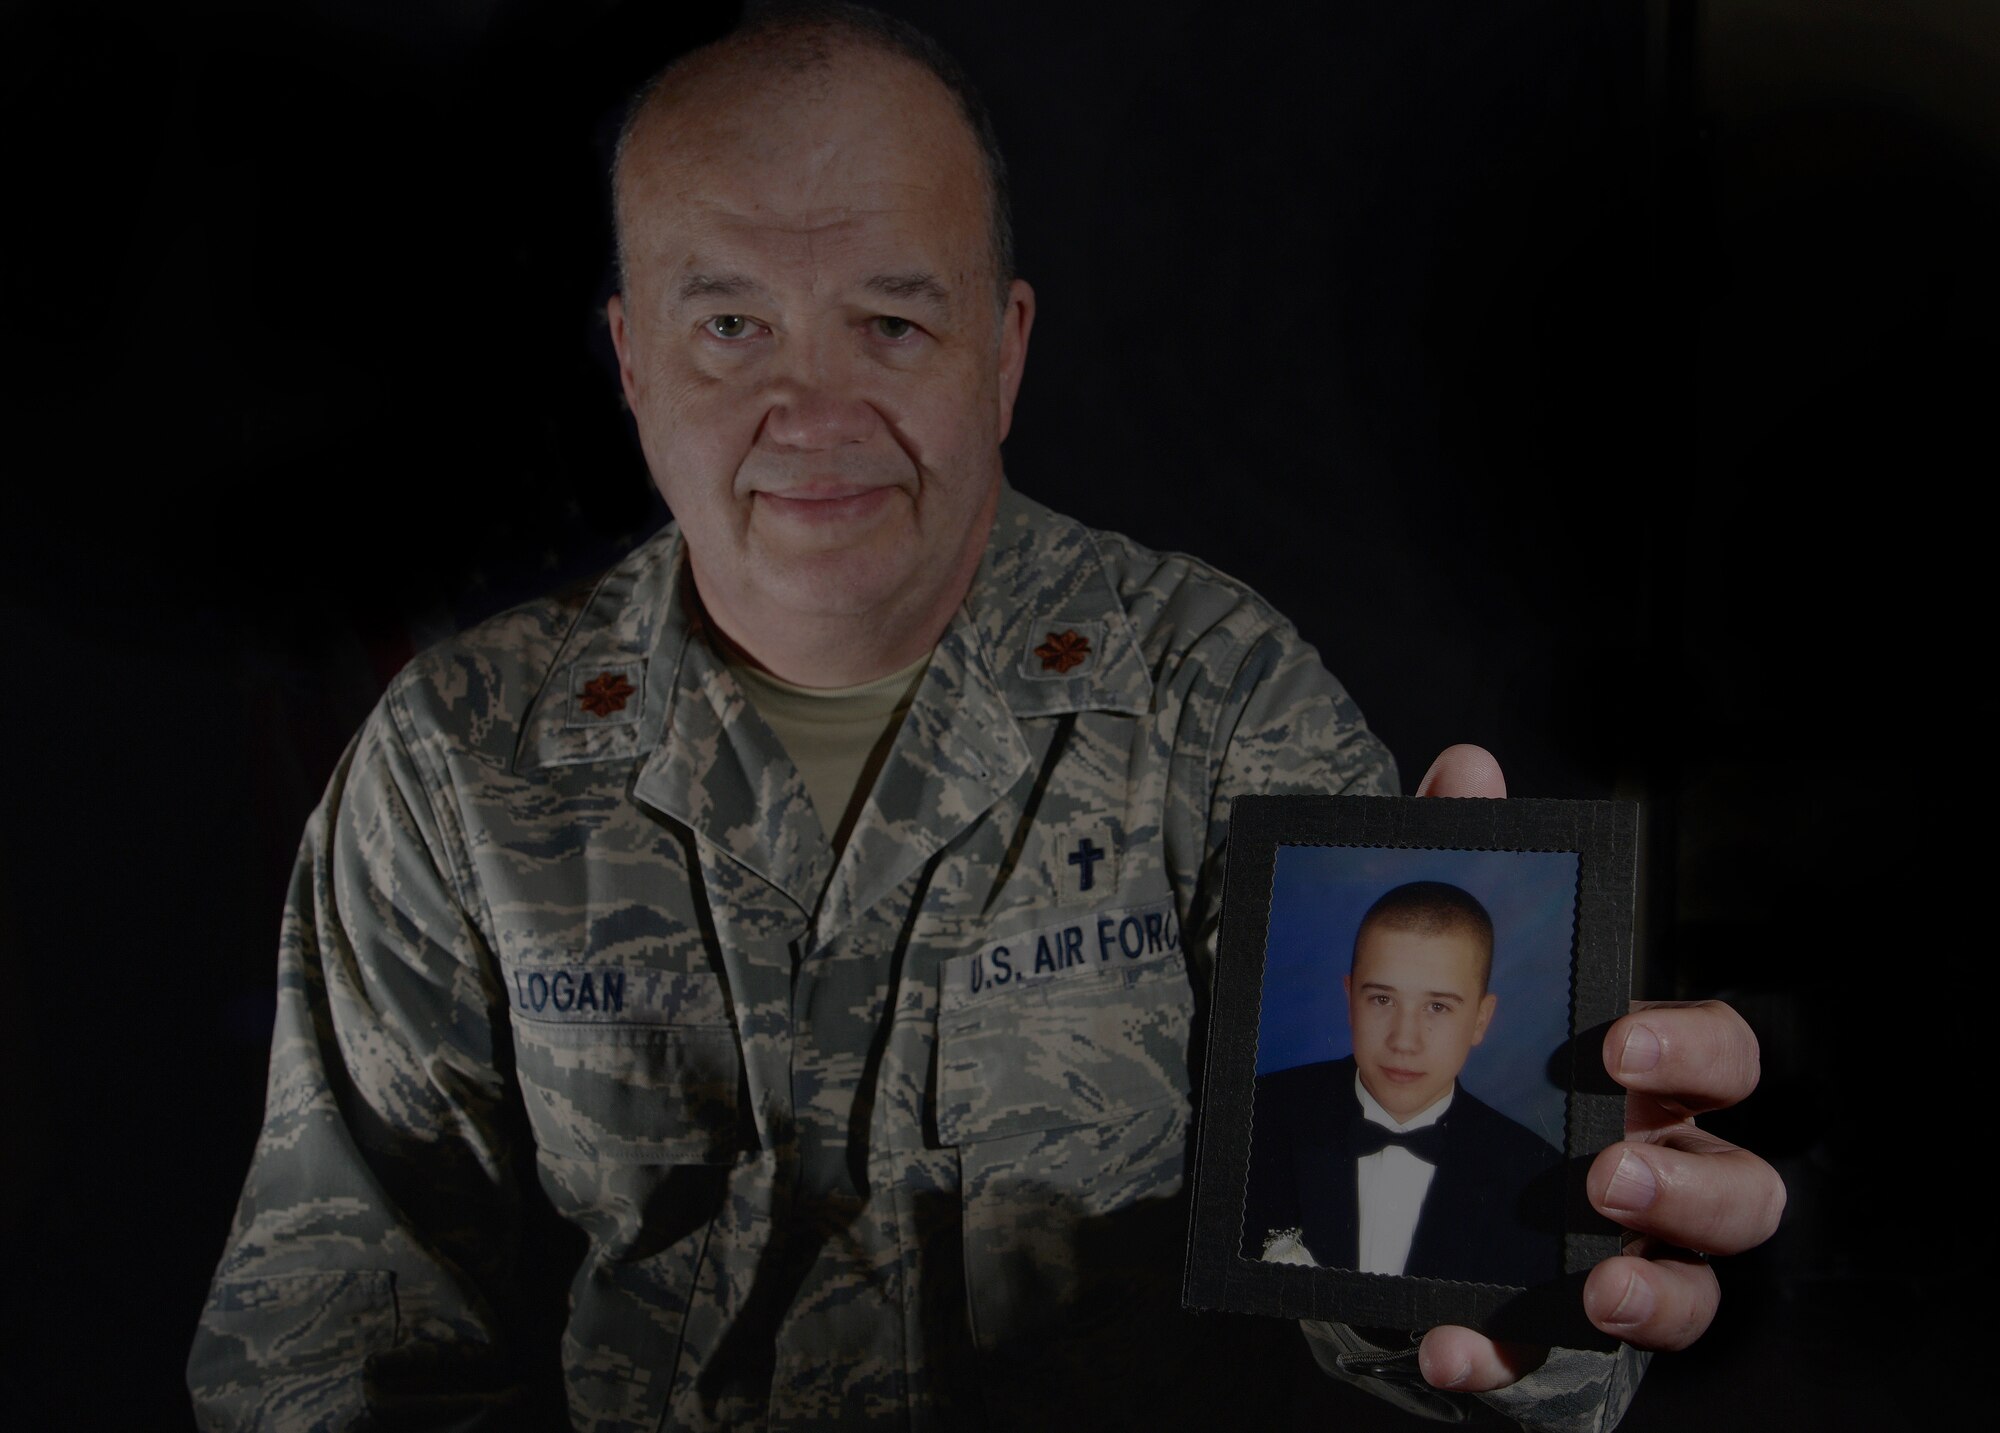 U.S. Air Force Maj. William Logan, a chaplain with the 35th Fighter Wing, holds a picture of his son, Zac, at Misawa Air Base, Japan, Feb. 23, 2016. Logan shared the story of his son’s suicide and the effects of the aftermath. He highlighted the recovery process hoping to inspire others to come forward for help in times of need. Logan is from Medina, Tennessee. (U.S. Air Force photo by Airman 1st Class Jordyn Fetter)